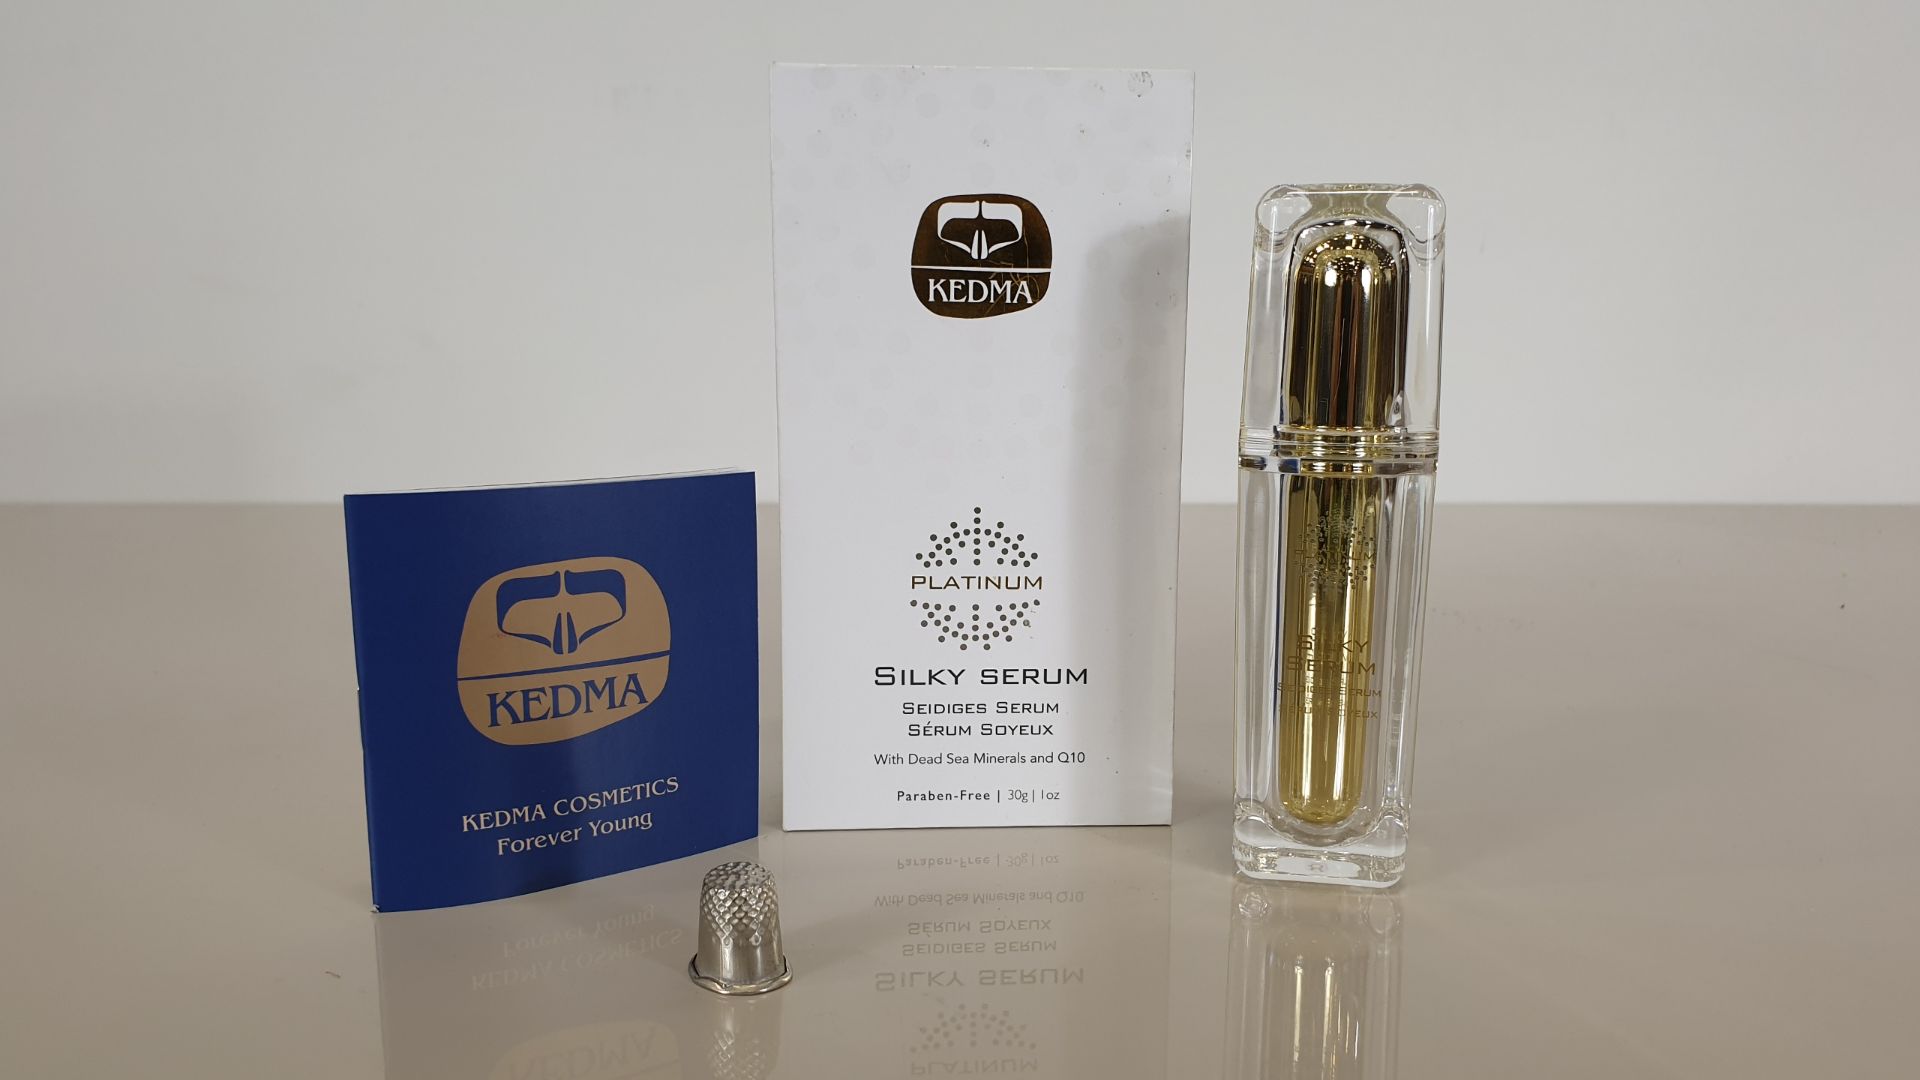 (LOT FOR THURSDAY 28TH MAY AUCTION) 3 X BRAND NEW KEDMA PLATINUM SILKY SERUM WITH DEAD SEA